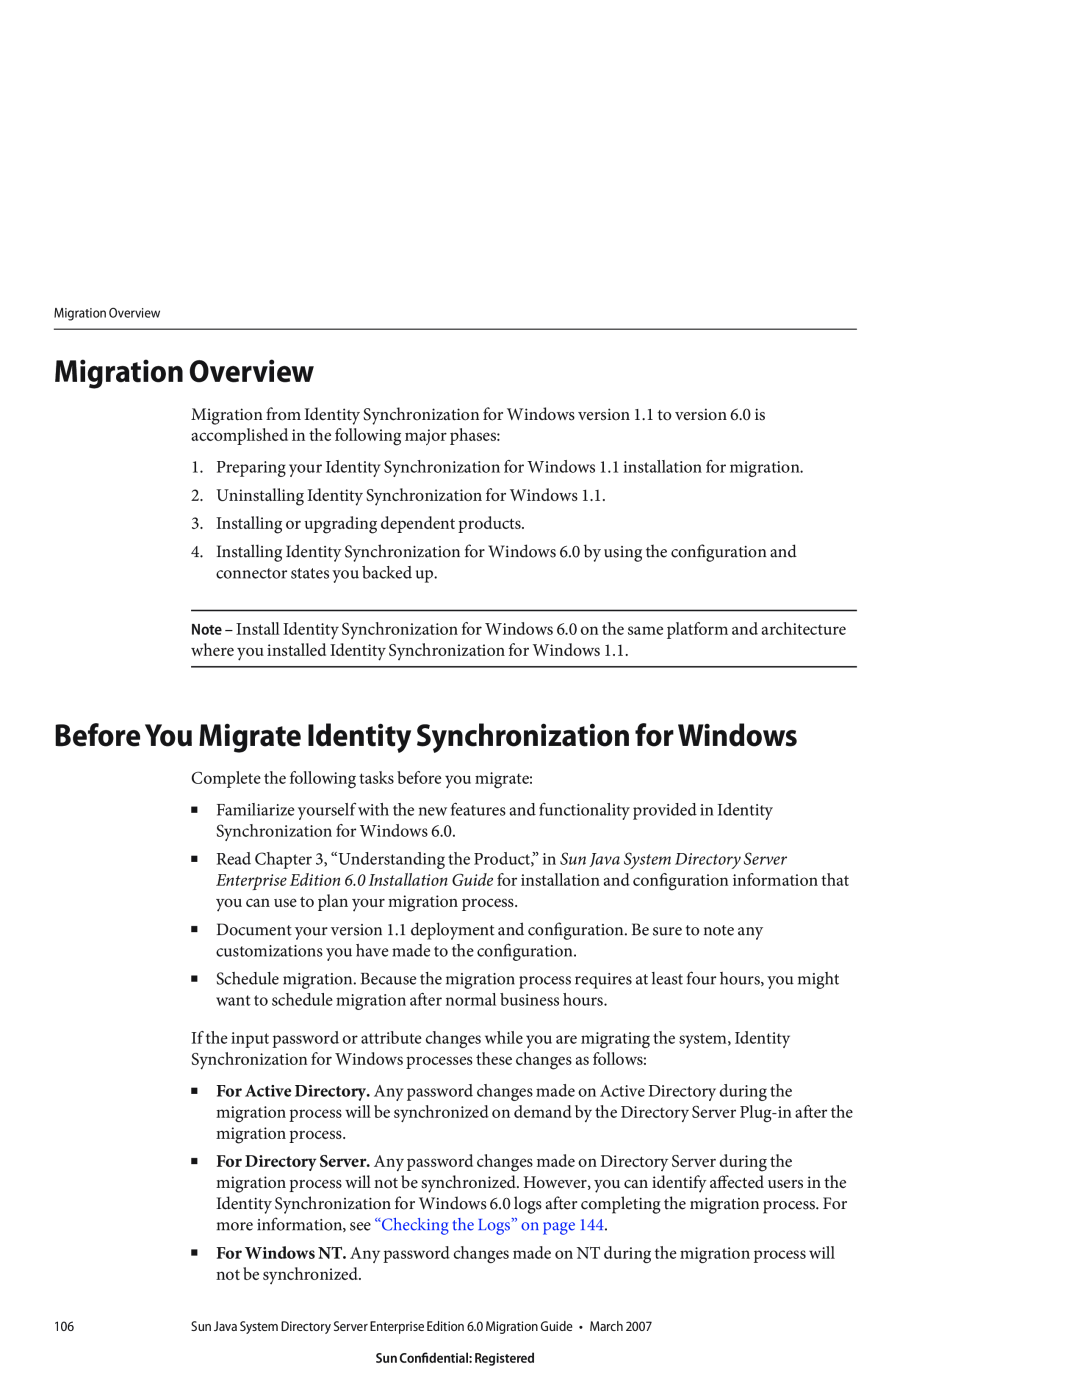 Sun Microsystems 8190994 manual Migration Overview, Before You Migrate Identity Synchronization for Windows 